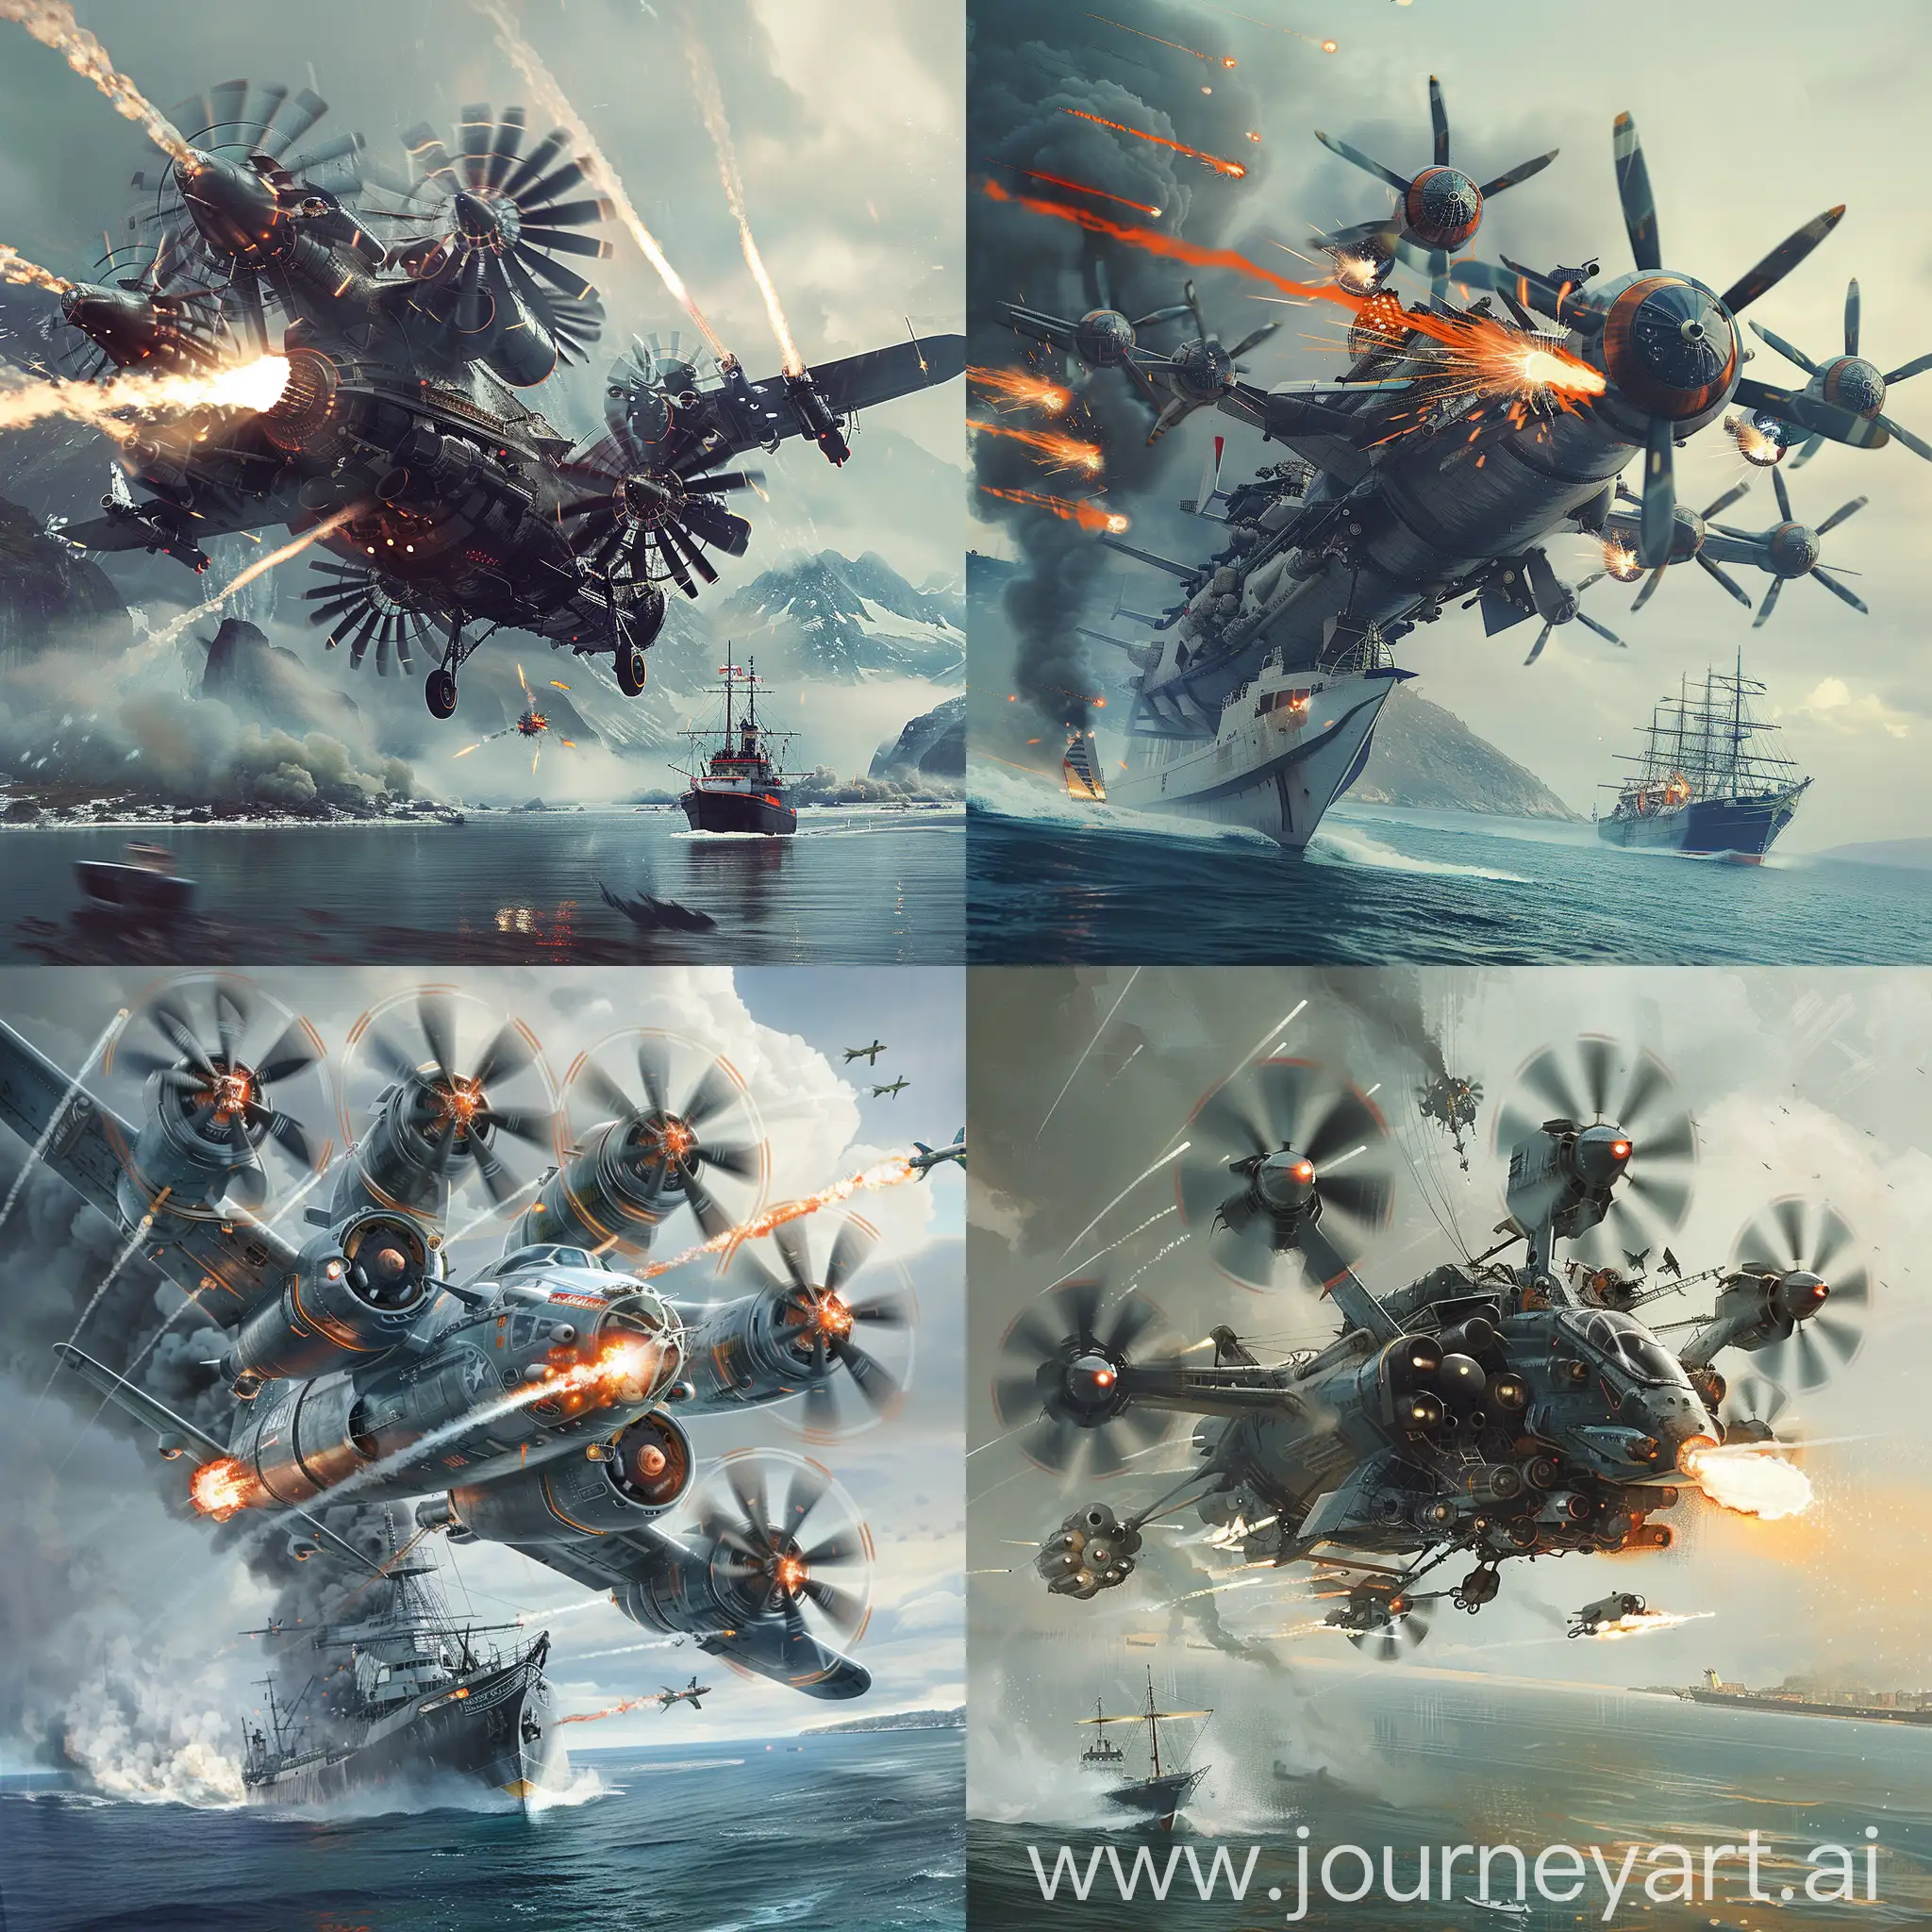 retro-futuristic fighter plane with many propellers is shooting a ship on the water

